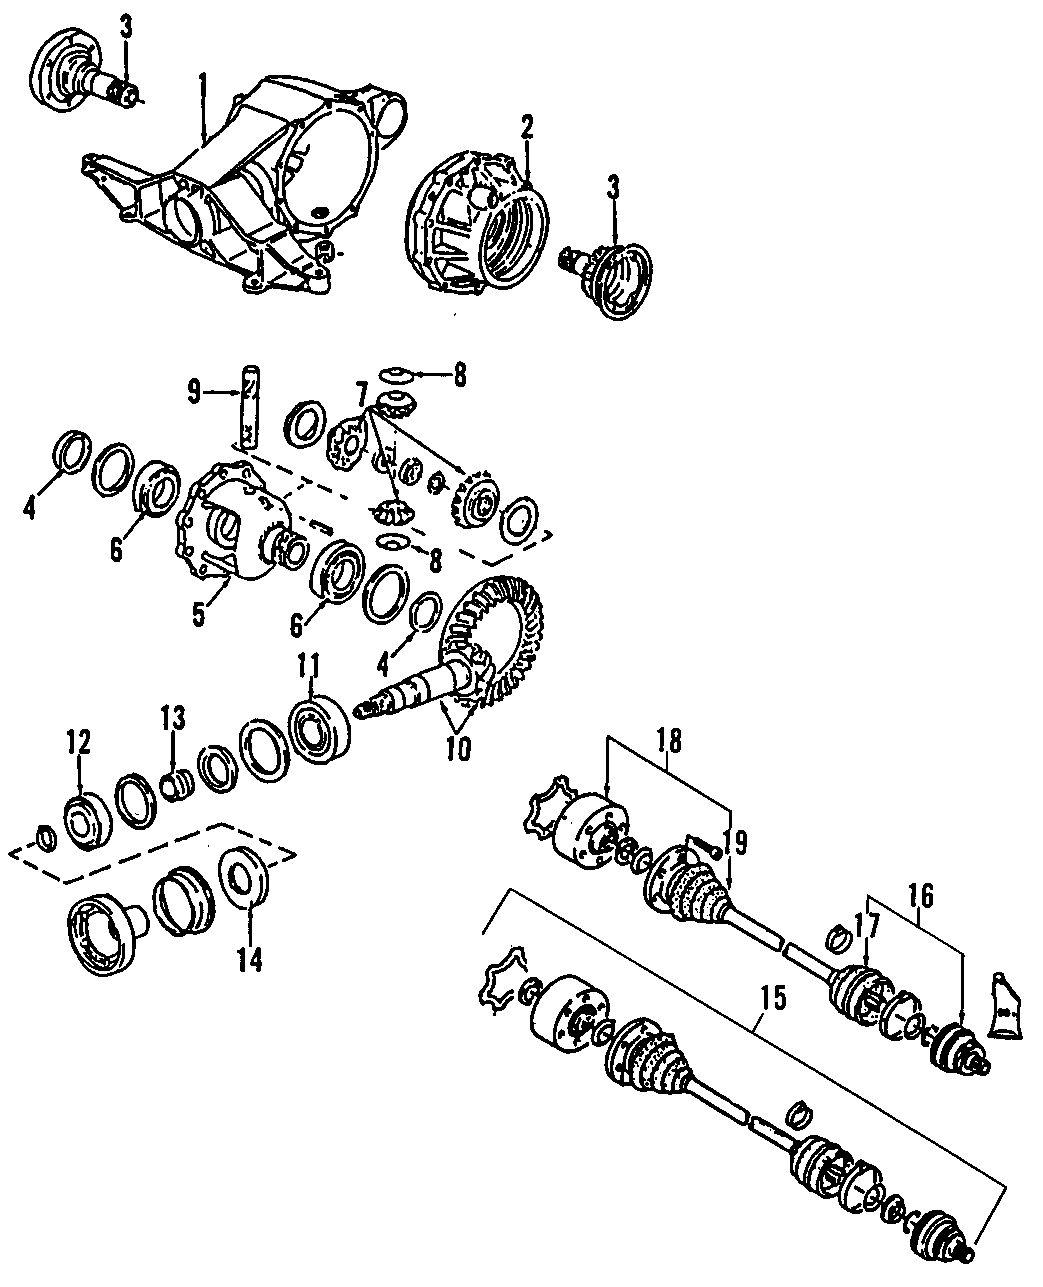 17DRIVE AXLES. REAR AXLE. AXLE SHAFTS & JOINTS. DIFFERENTIAL. PROPELLER SHAFT.https://images.simplepart.com/images/parts/motor/fullsize/F220090.png